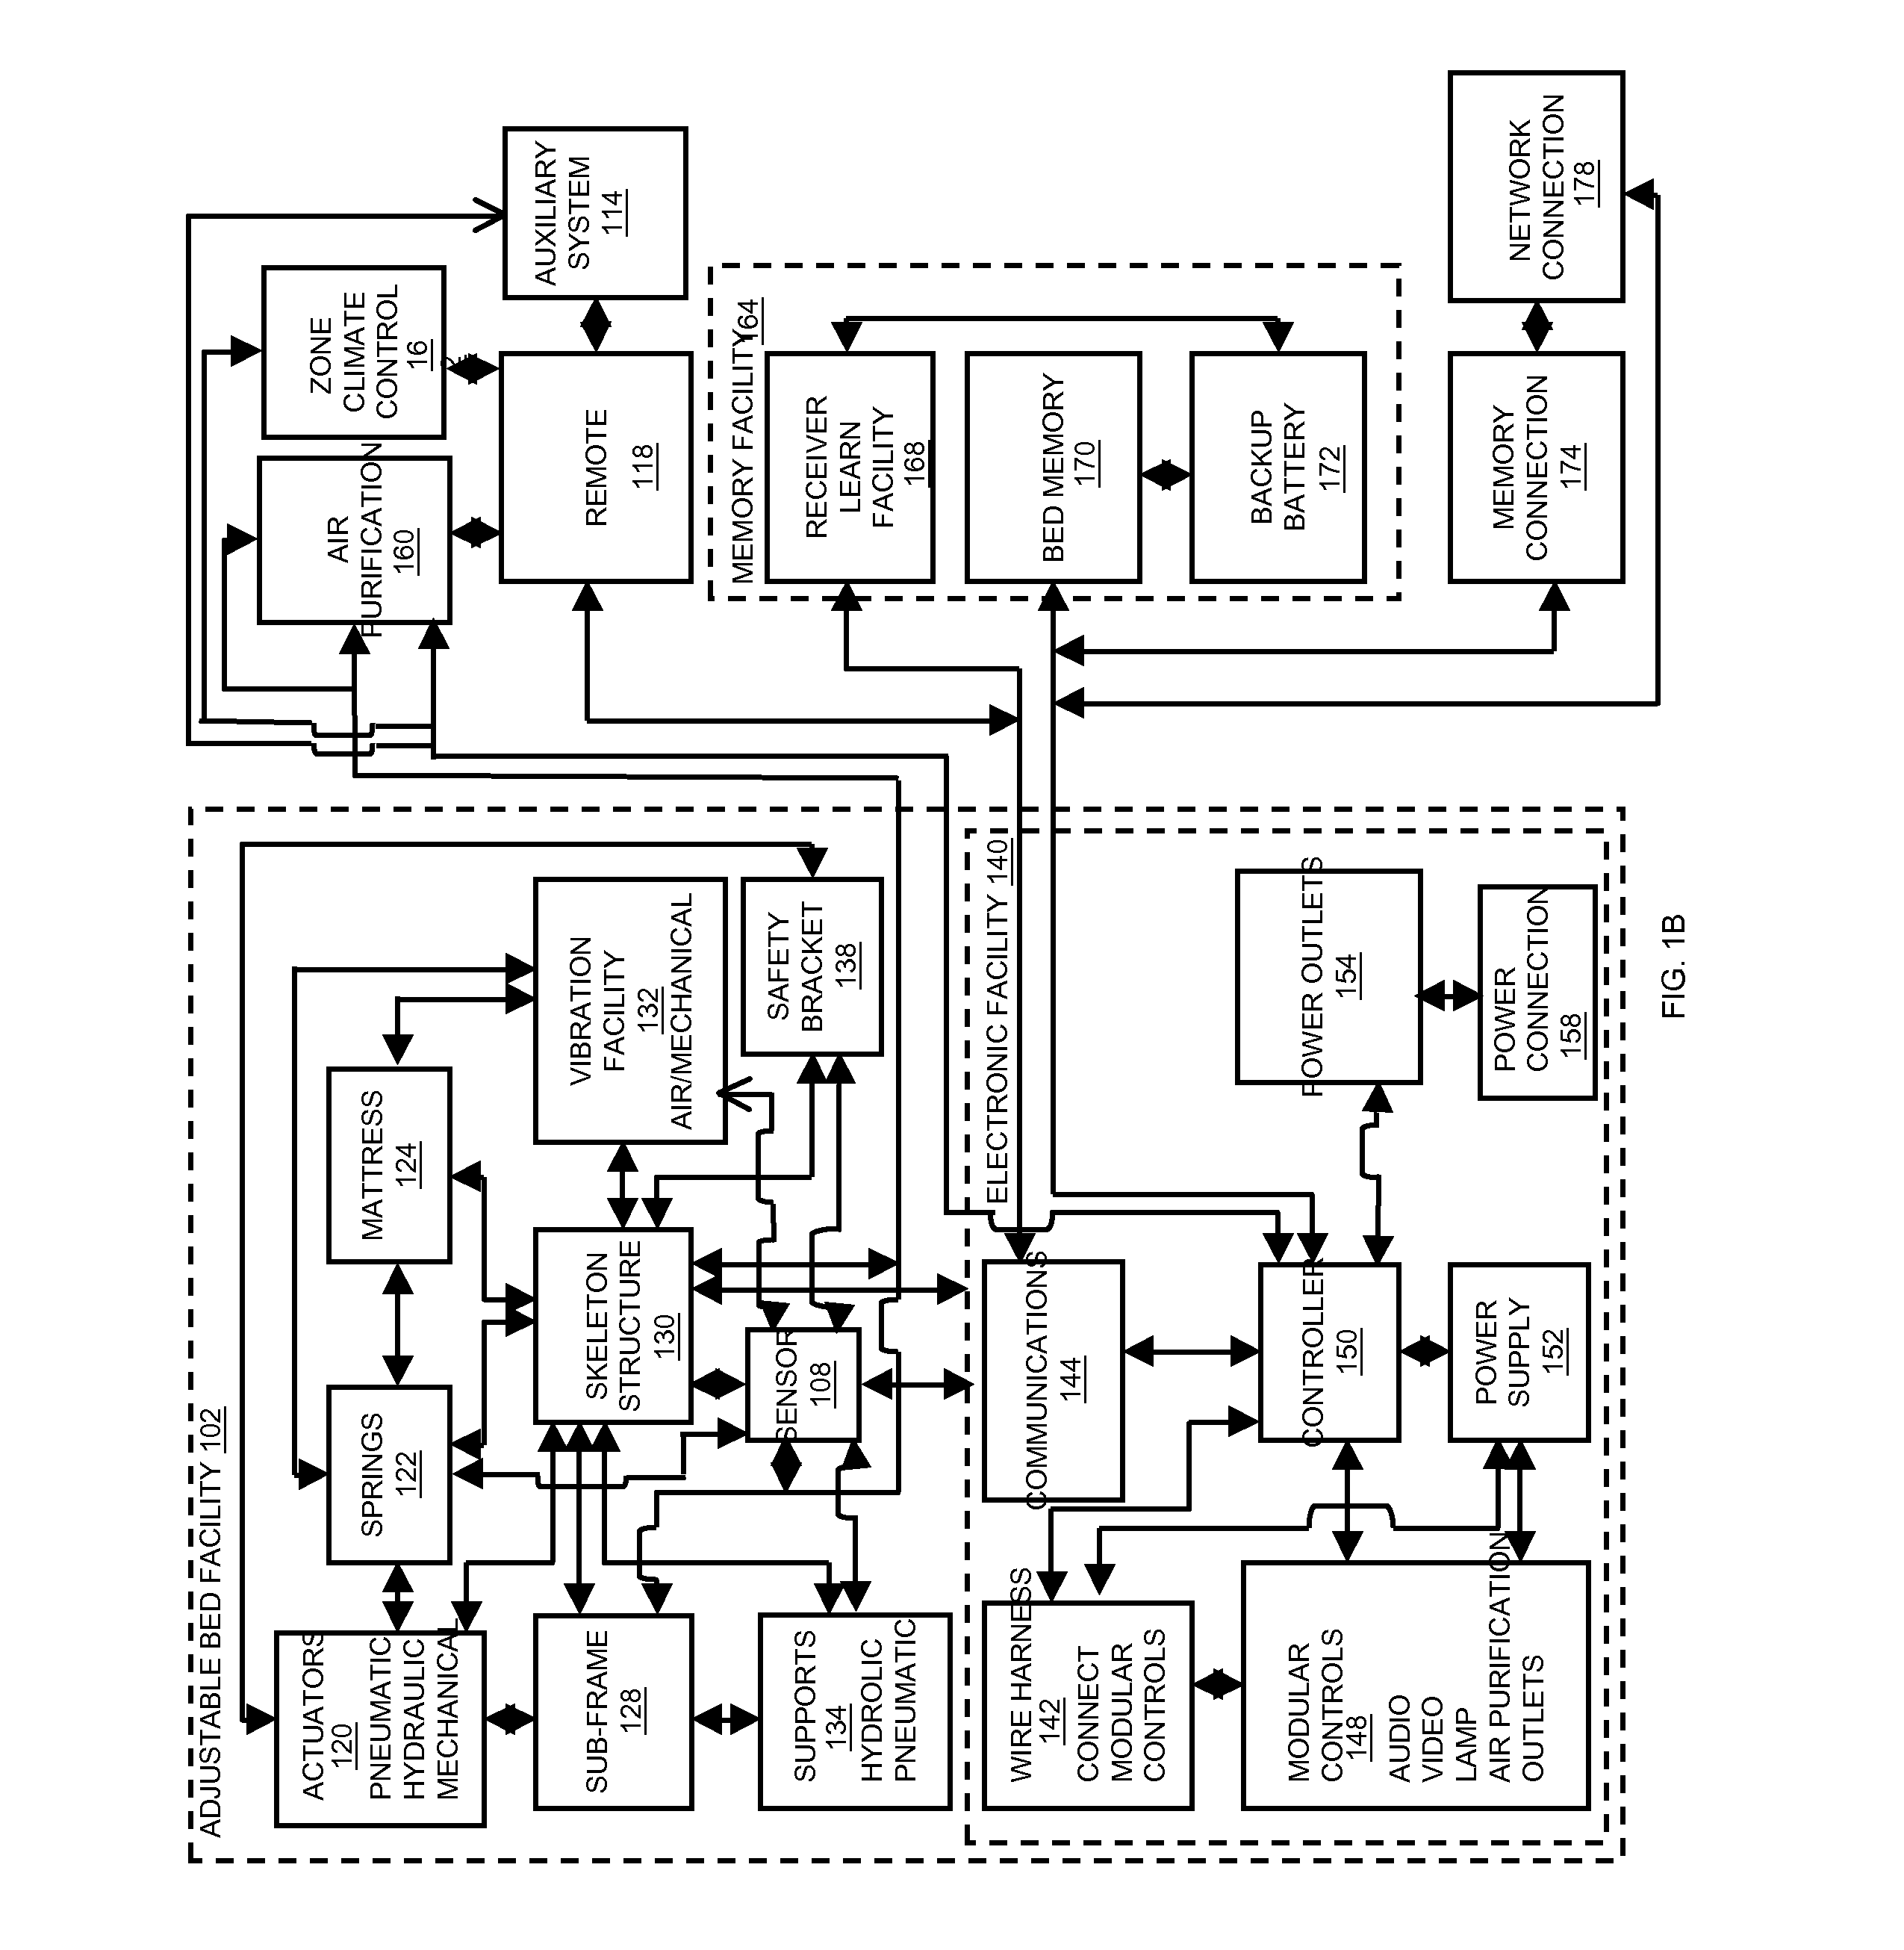 System of adjustable bed control to a memory position via a home network